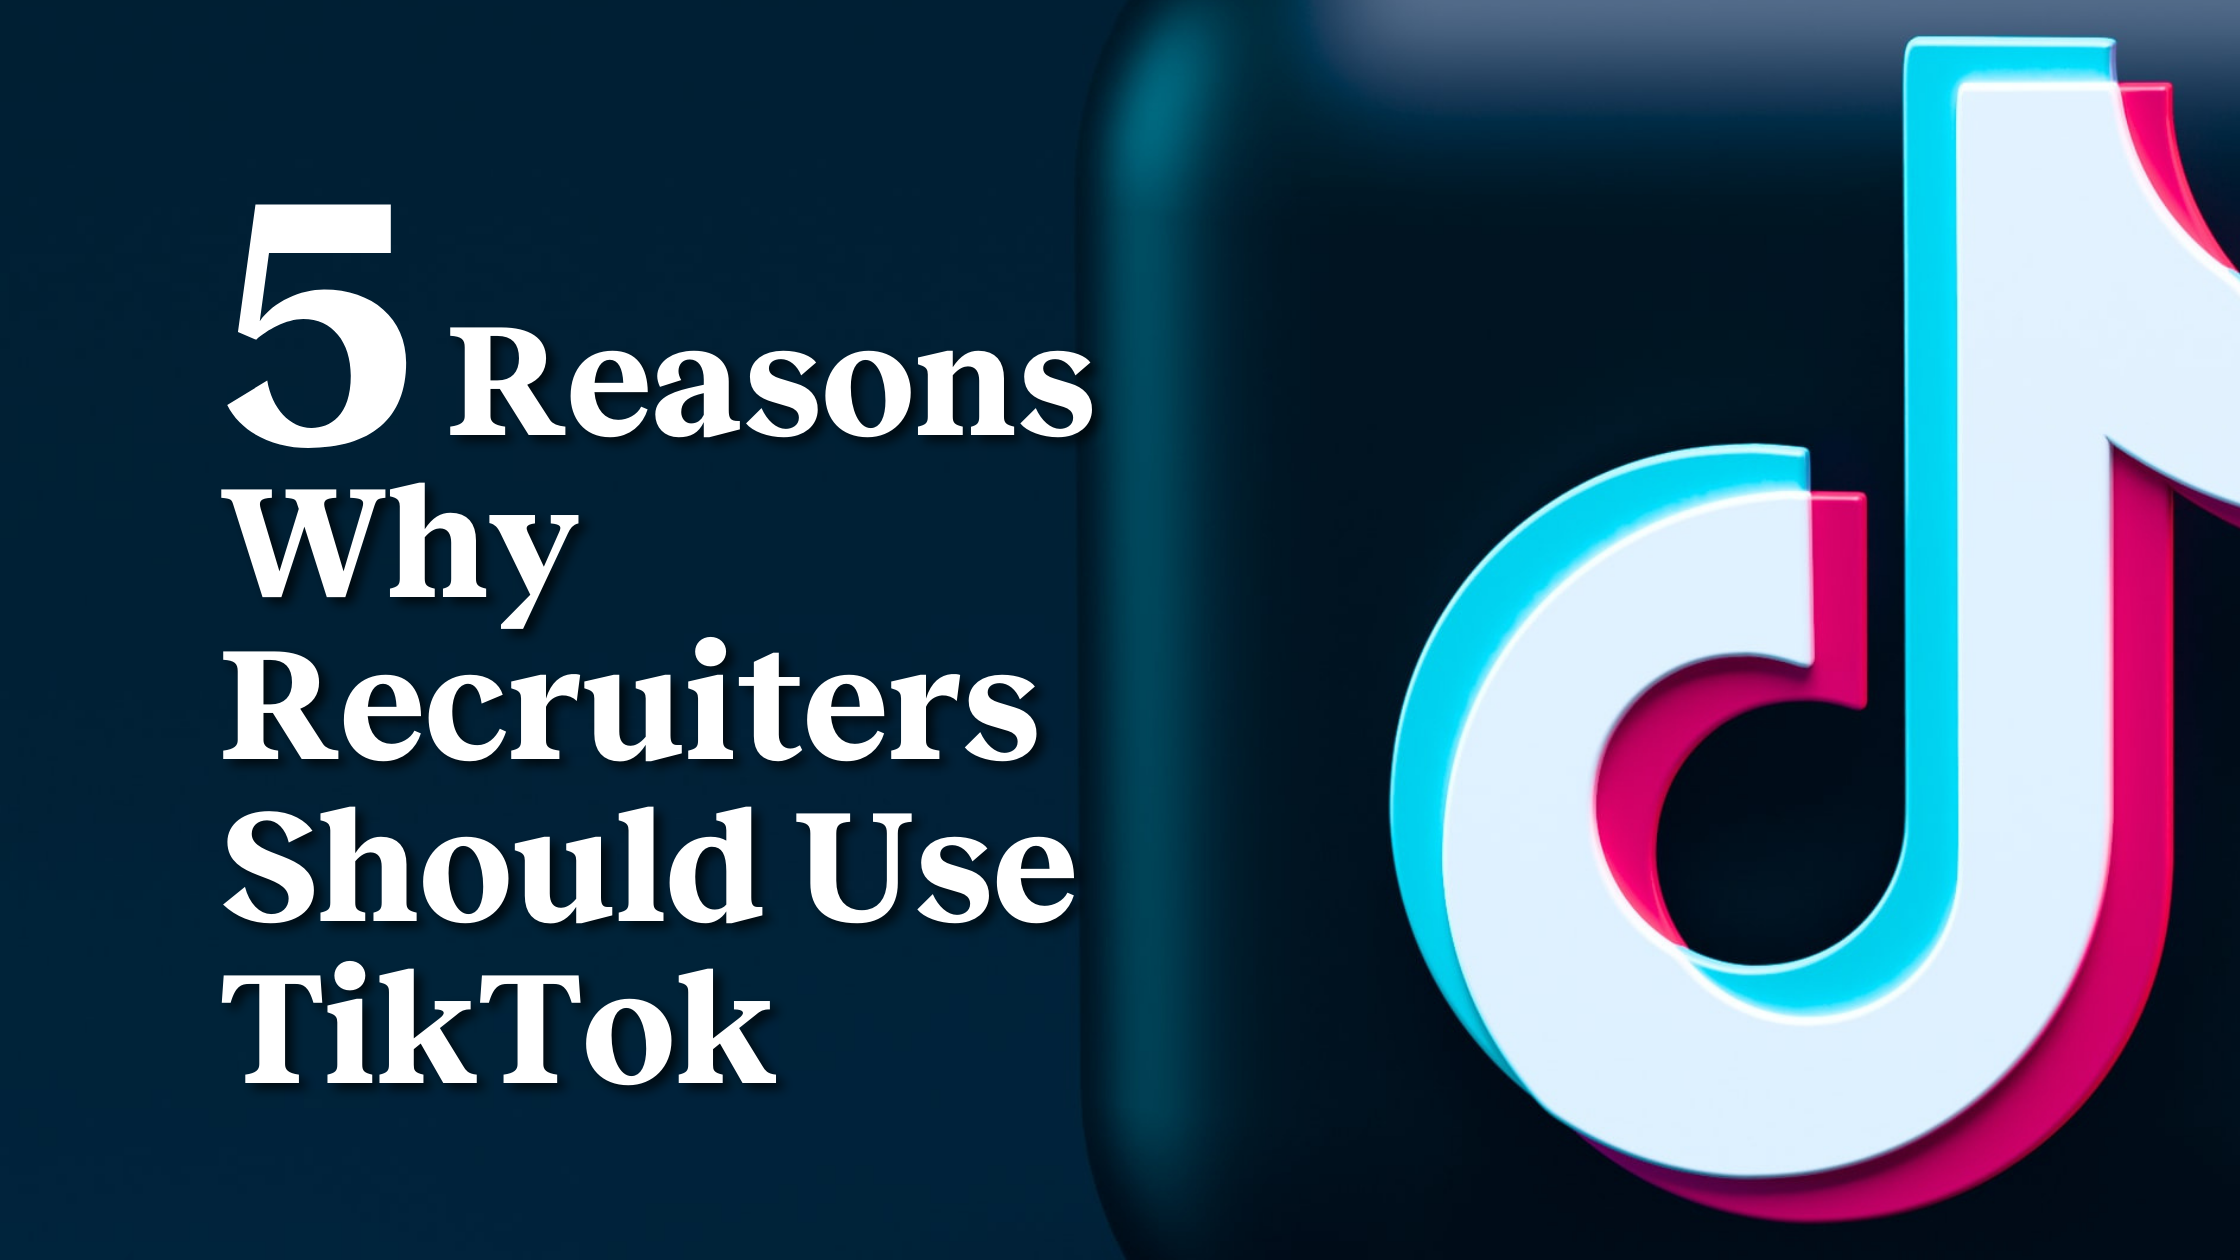 5 Reasons Why Recruiters Should Use TikTok